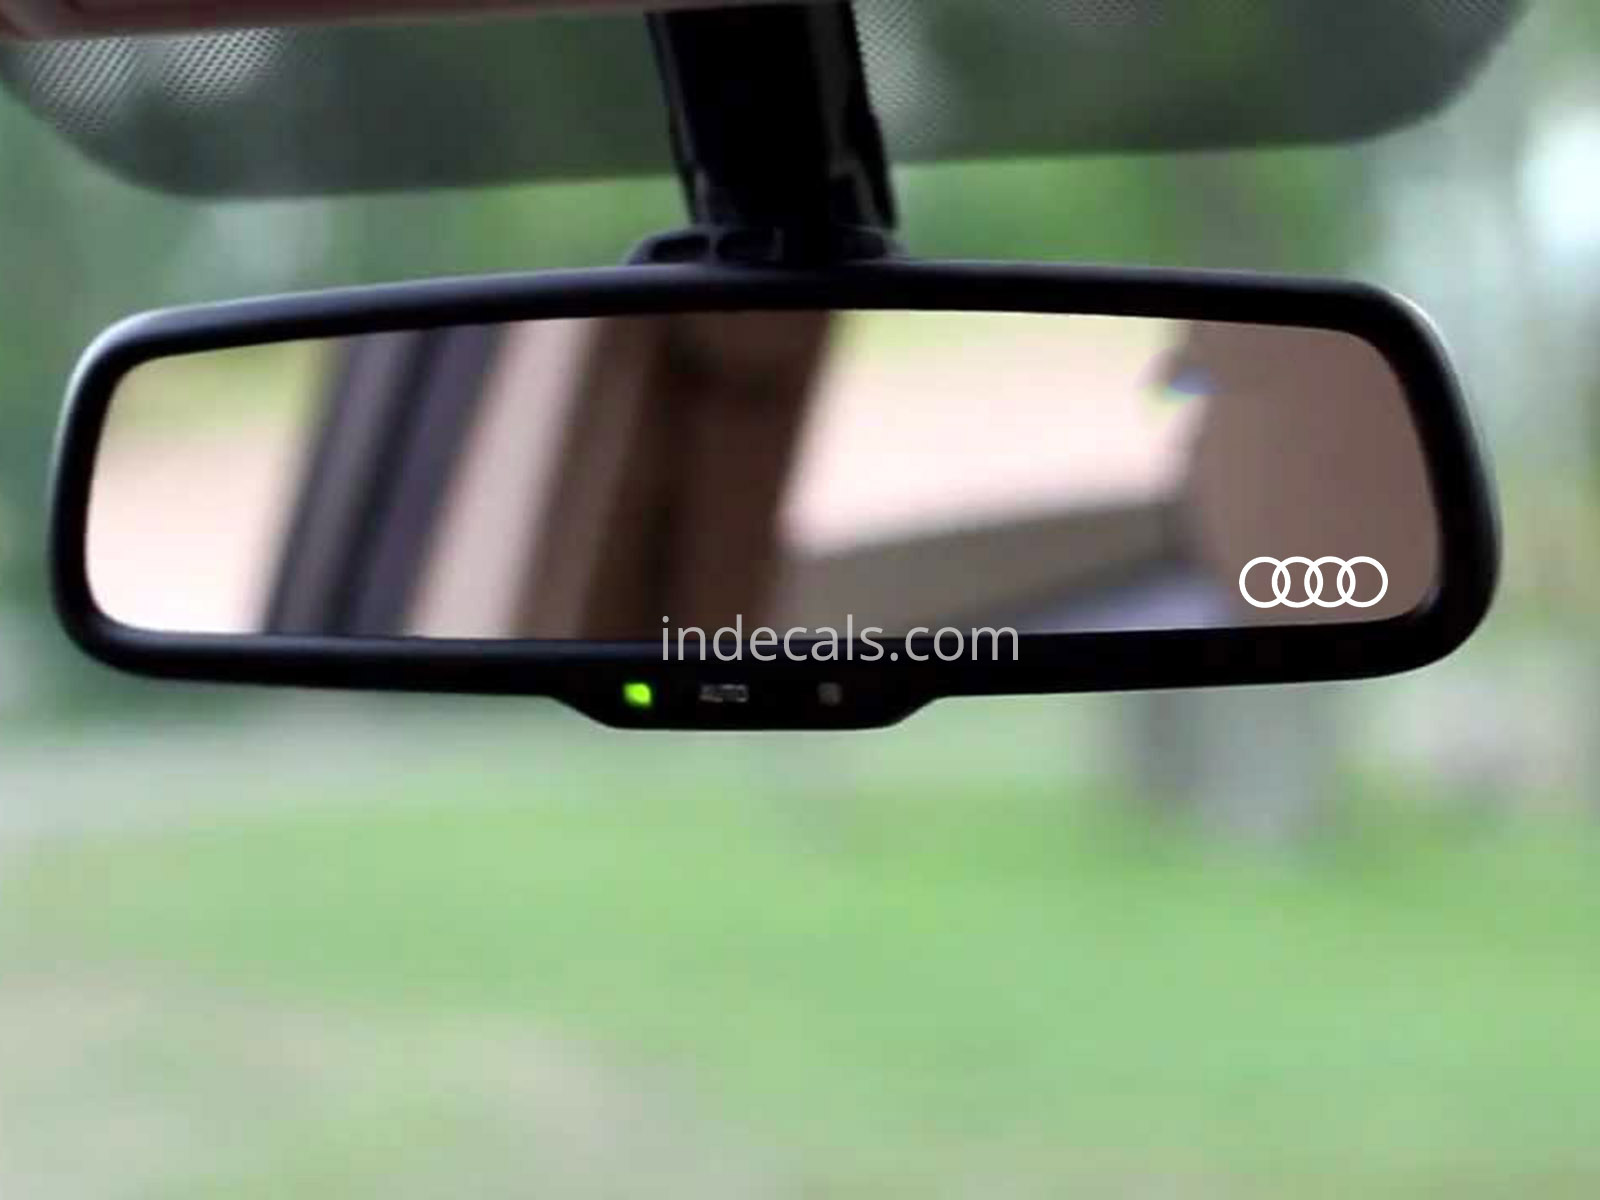 3 x Audi Rings Stickers for Interior Mirror - White